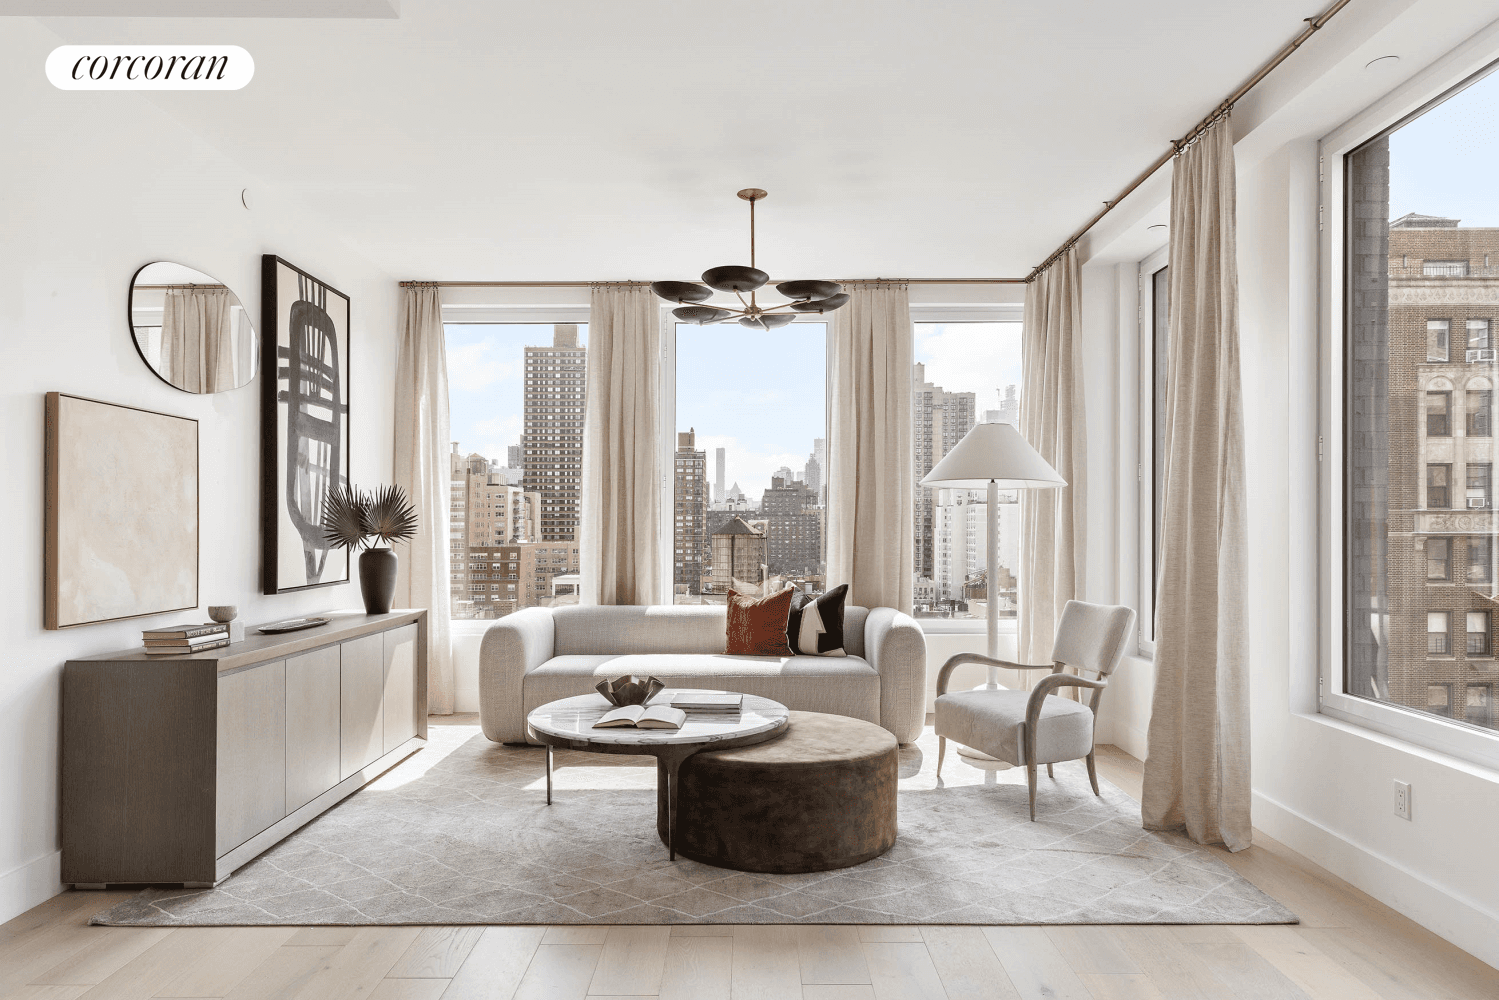 9th Floor at 323 East 79th StreetThree Bedrooms Two Baths Powder Room Private Outdoor Space 1, 910 sqftCLOSINGS ANTICIPATED THIS SUMMER323 E 79th Street offers a blend of contemporary elegance ...